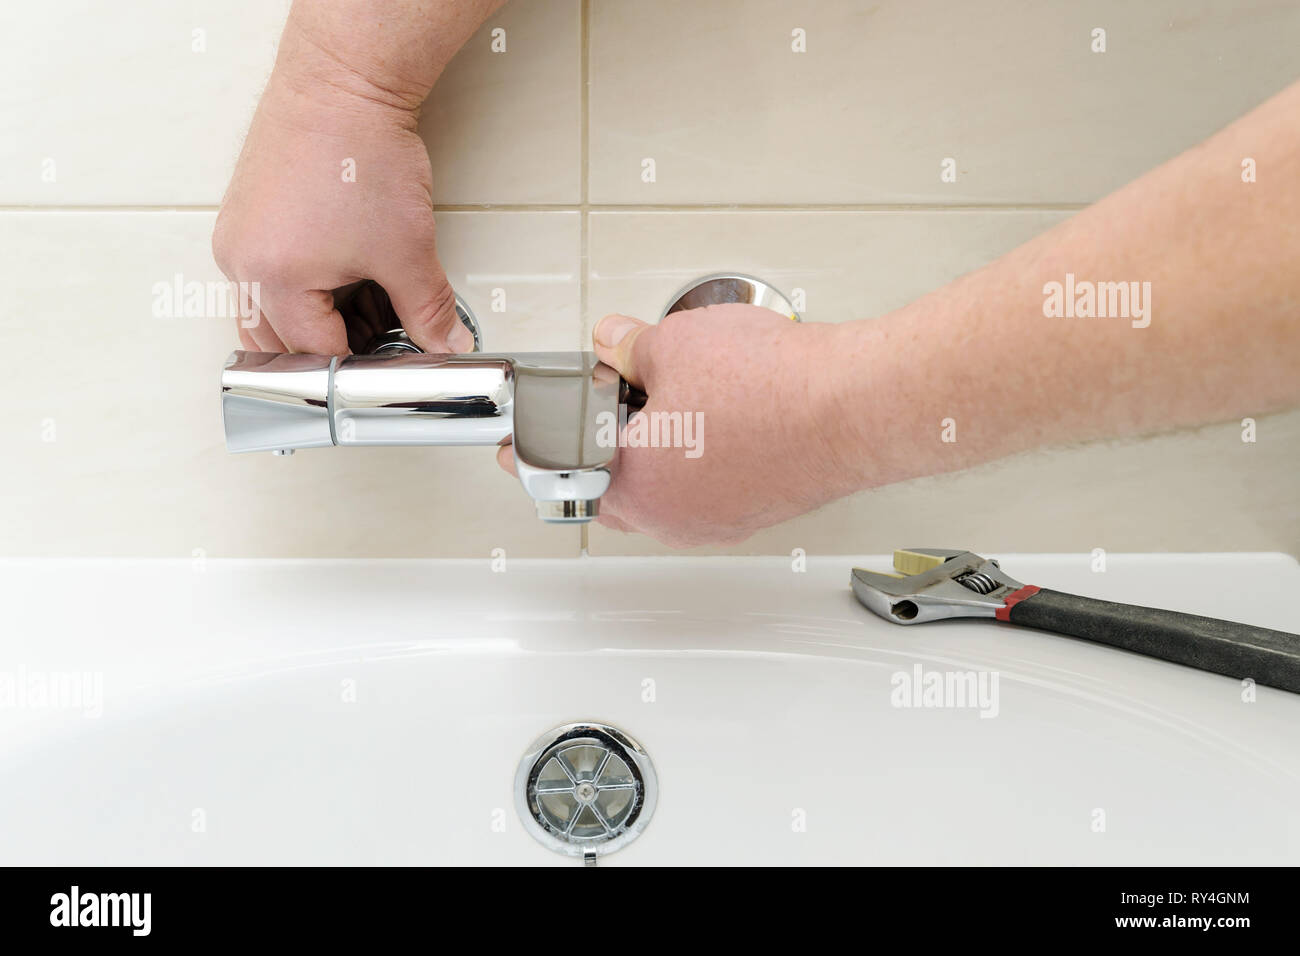 Installing faucet with thermostat. Man's hands are fixing bath tap into place. Stock Photo